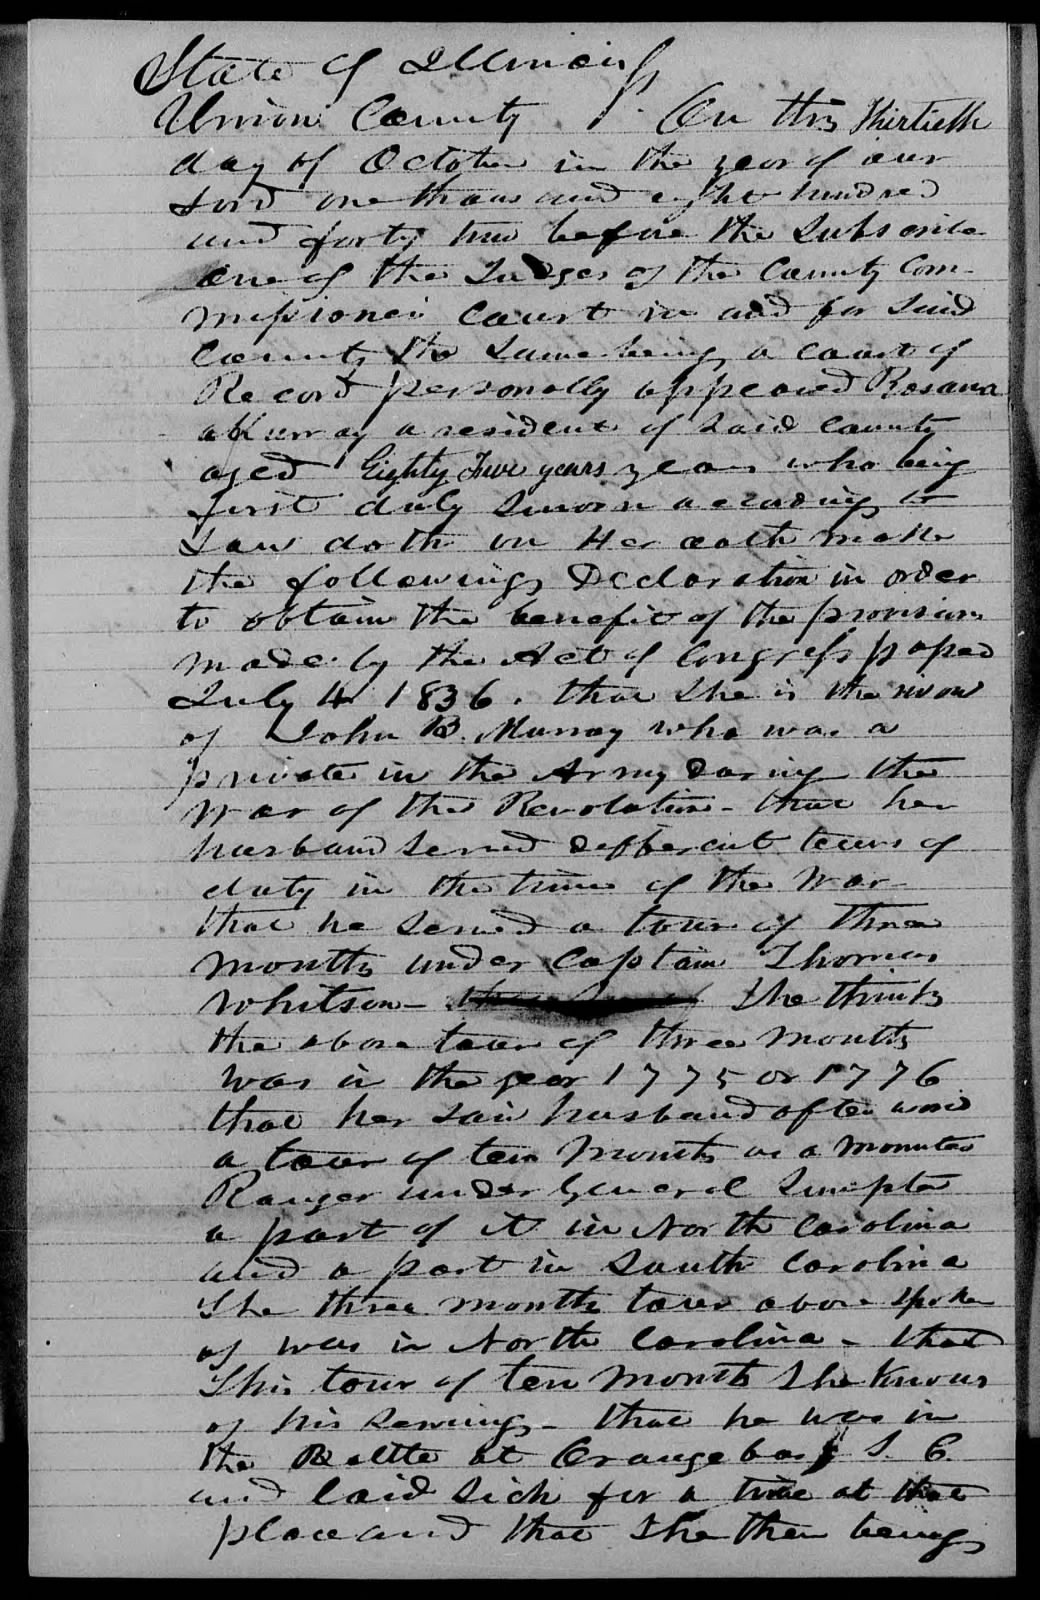 Application for a Widow's Pension from Rosana Murray, 30 October 1842, page 1